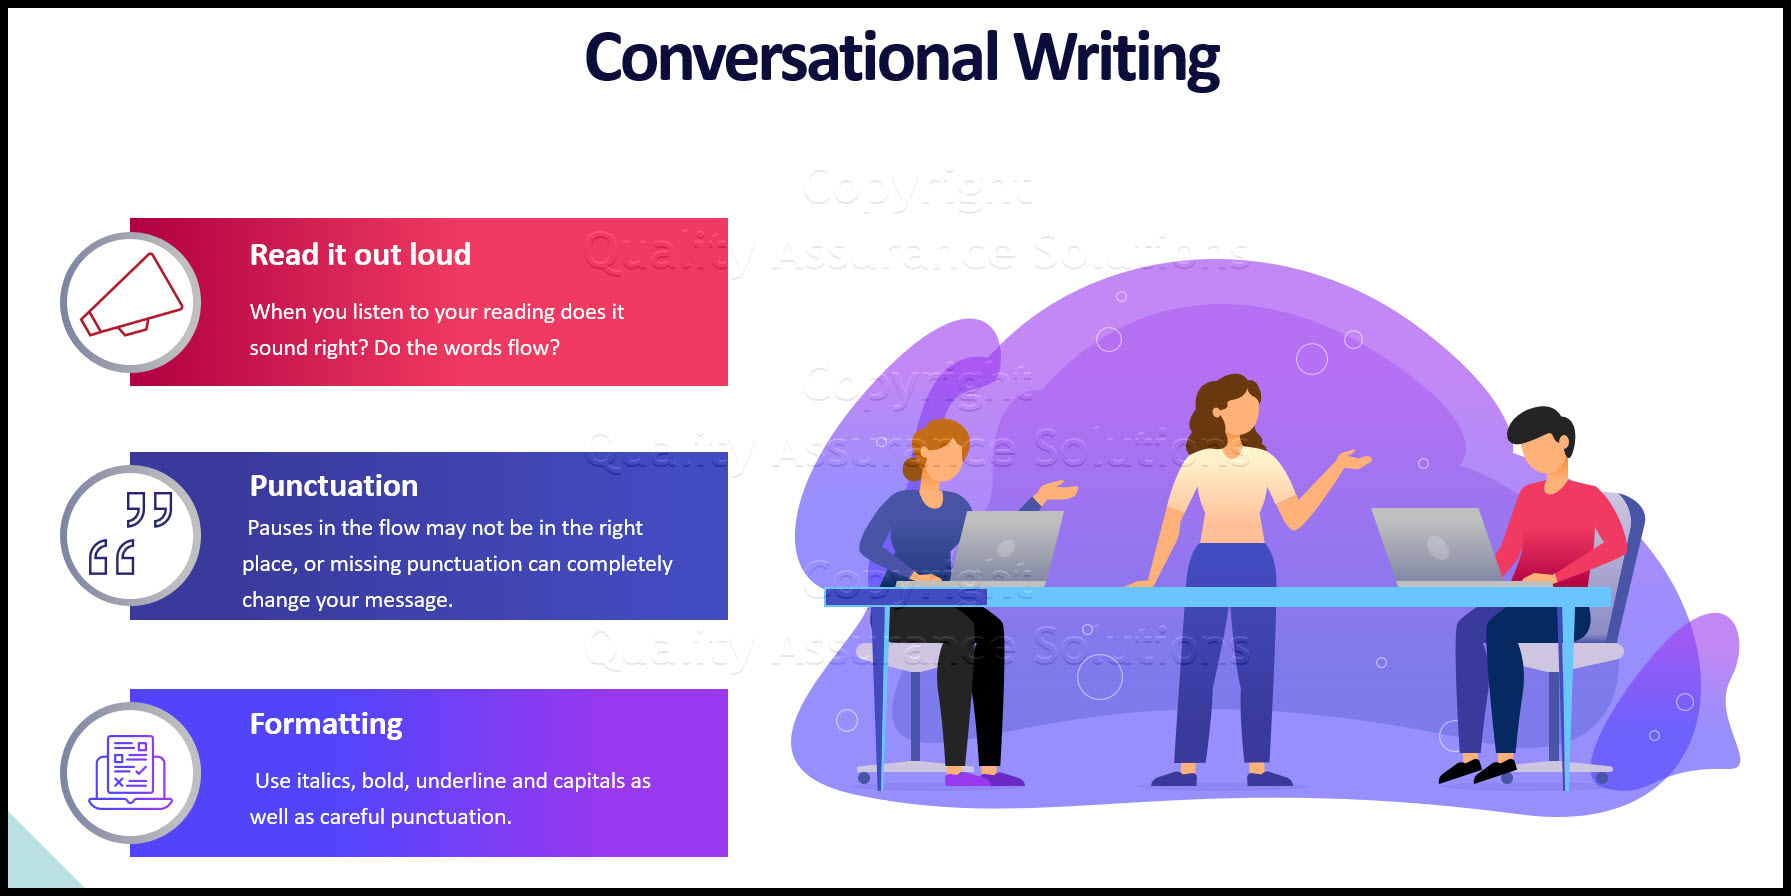 Conversational writing vs formal writing, which one are you using when writing to customers?